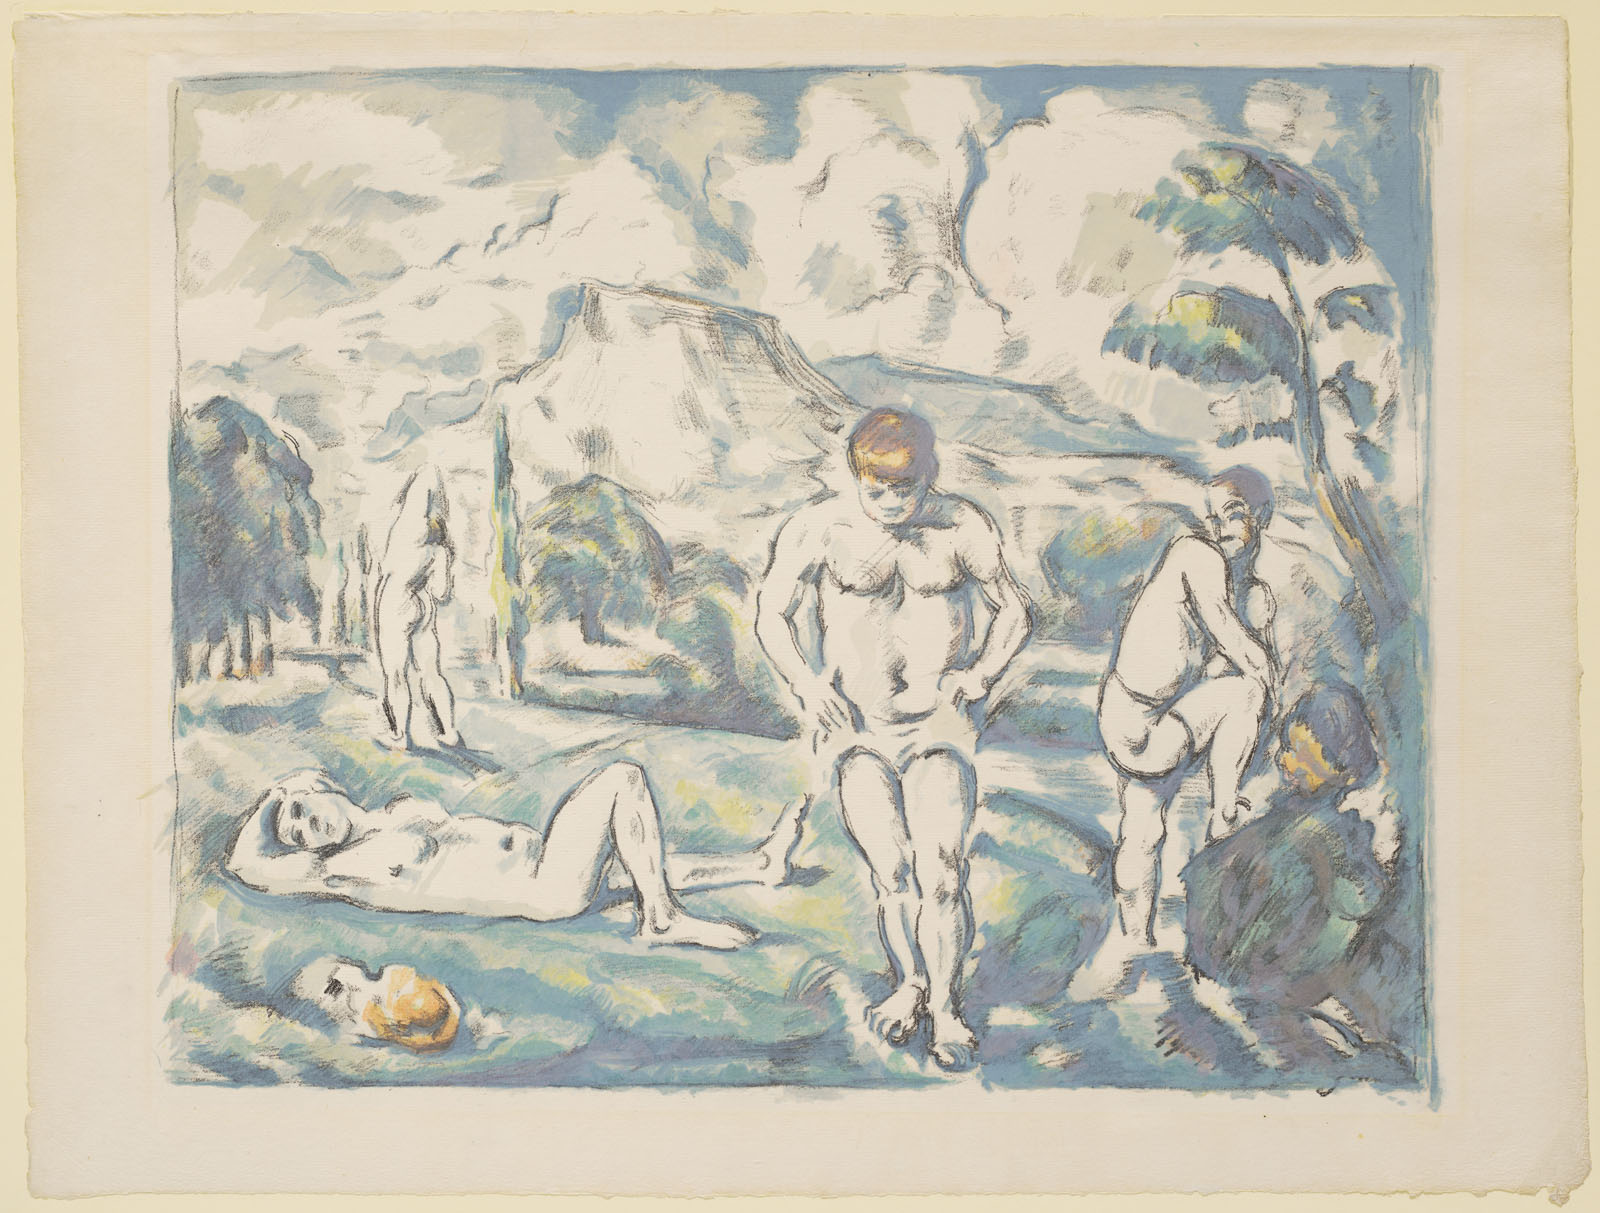 The Bathers: Large Plate, 1898